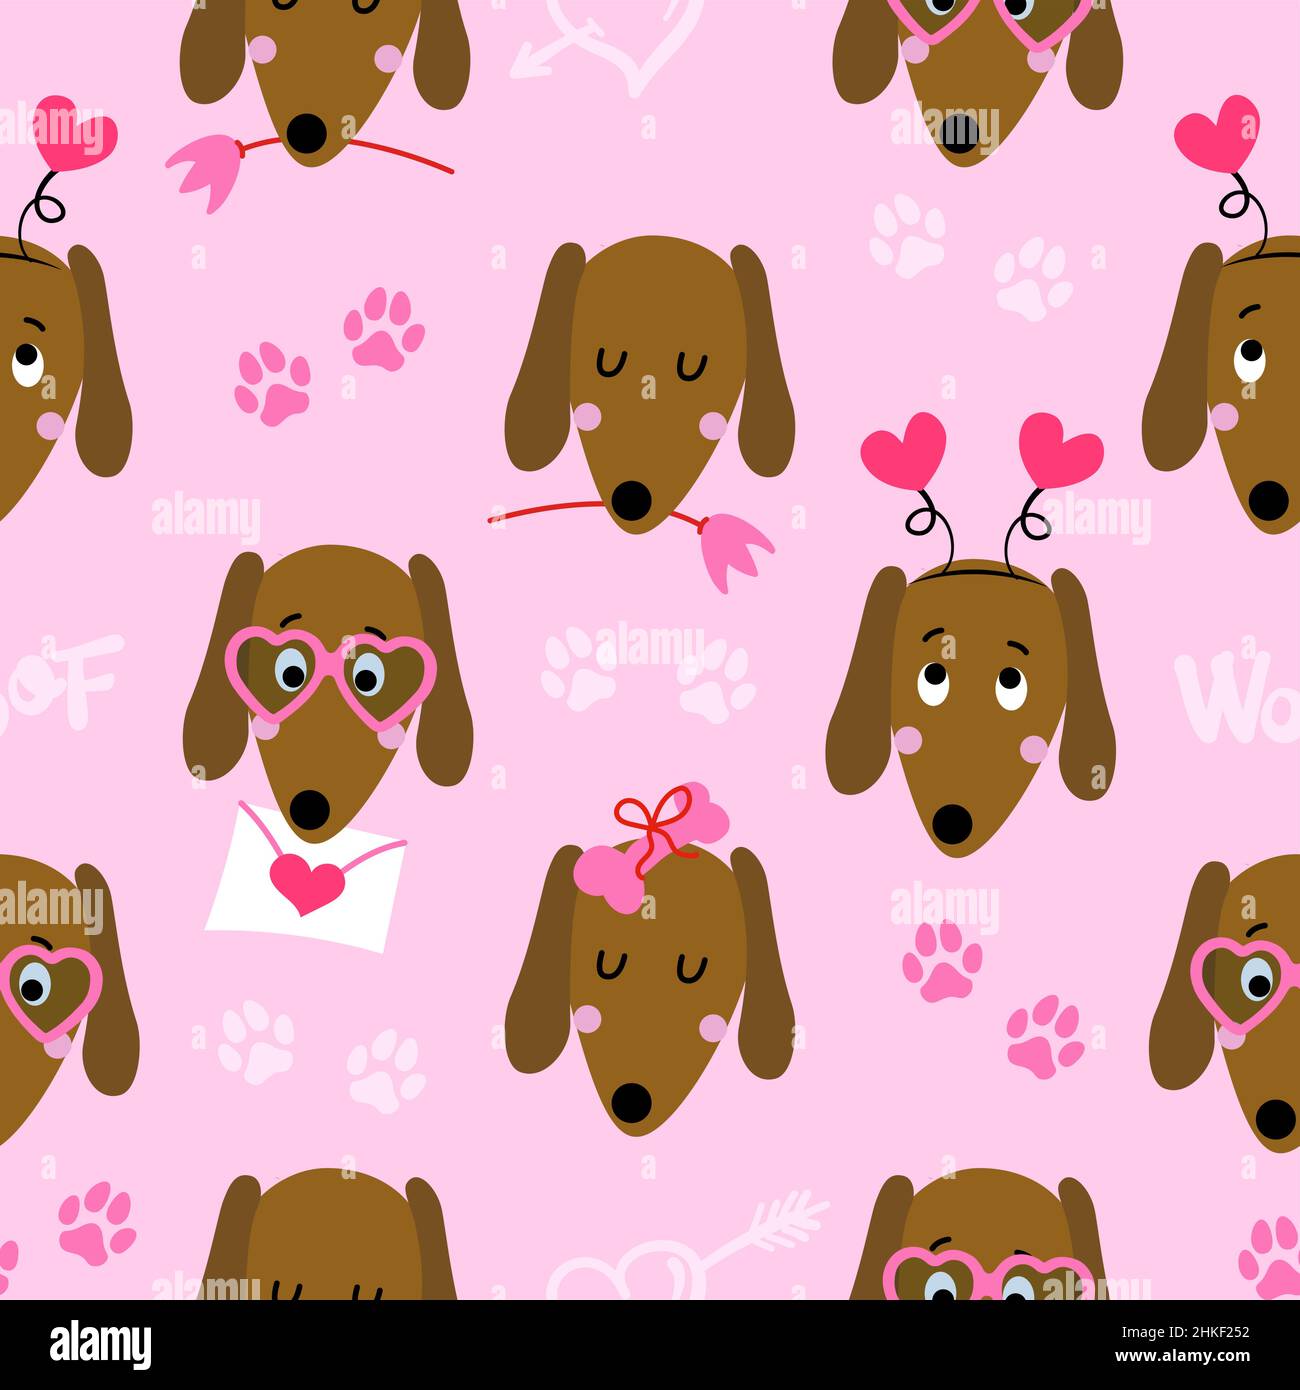 Dachshund Wallpaper 79 images